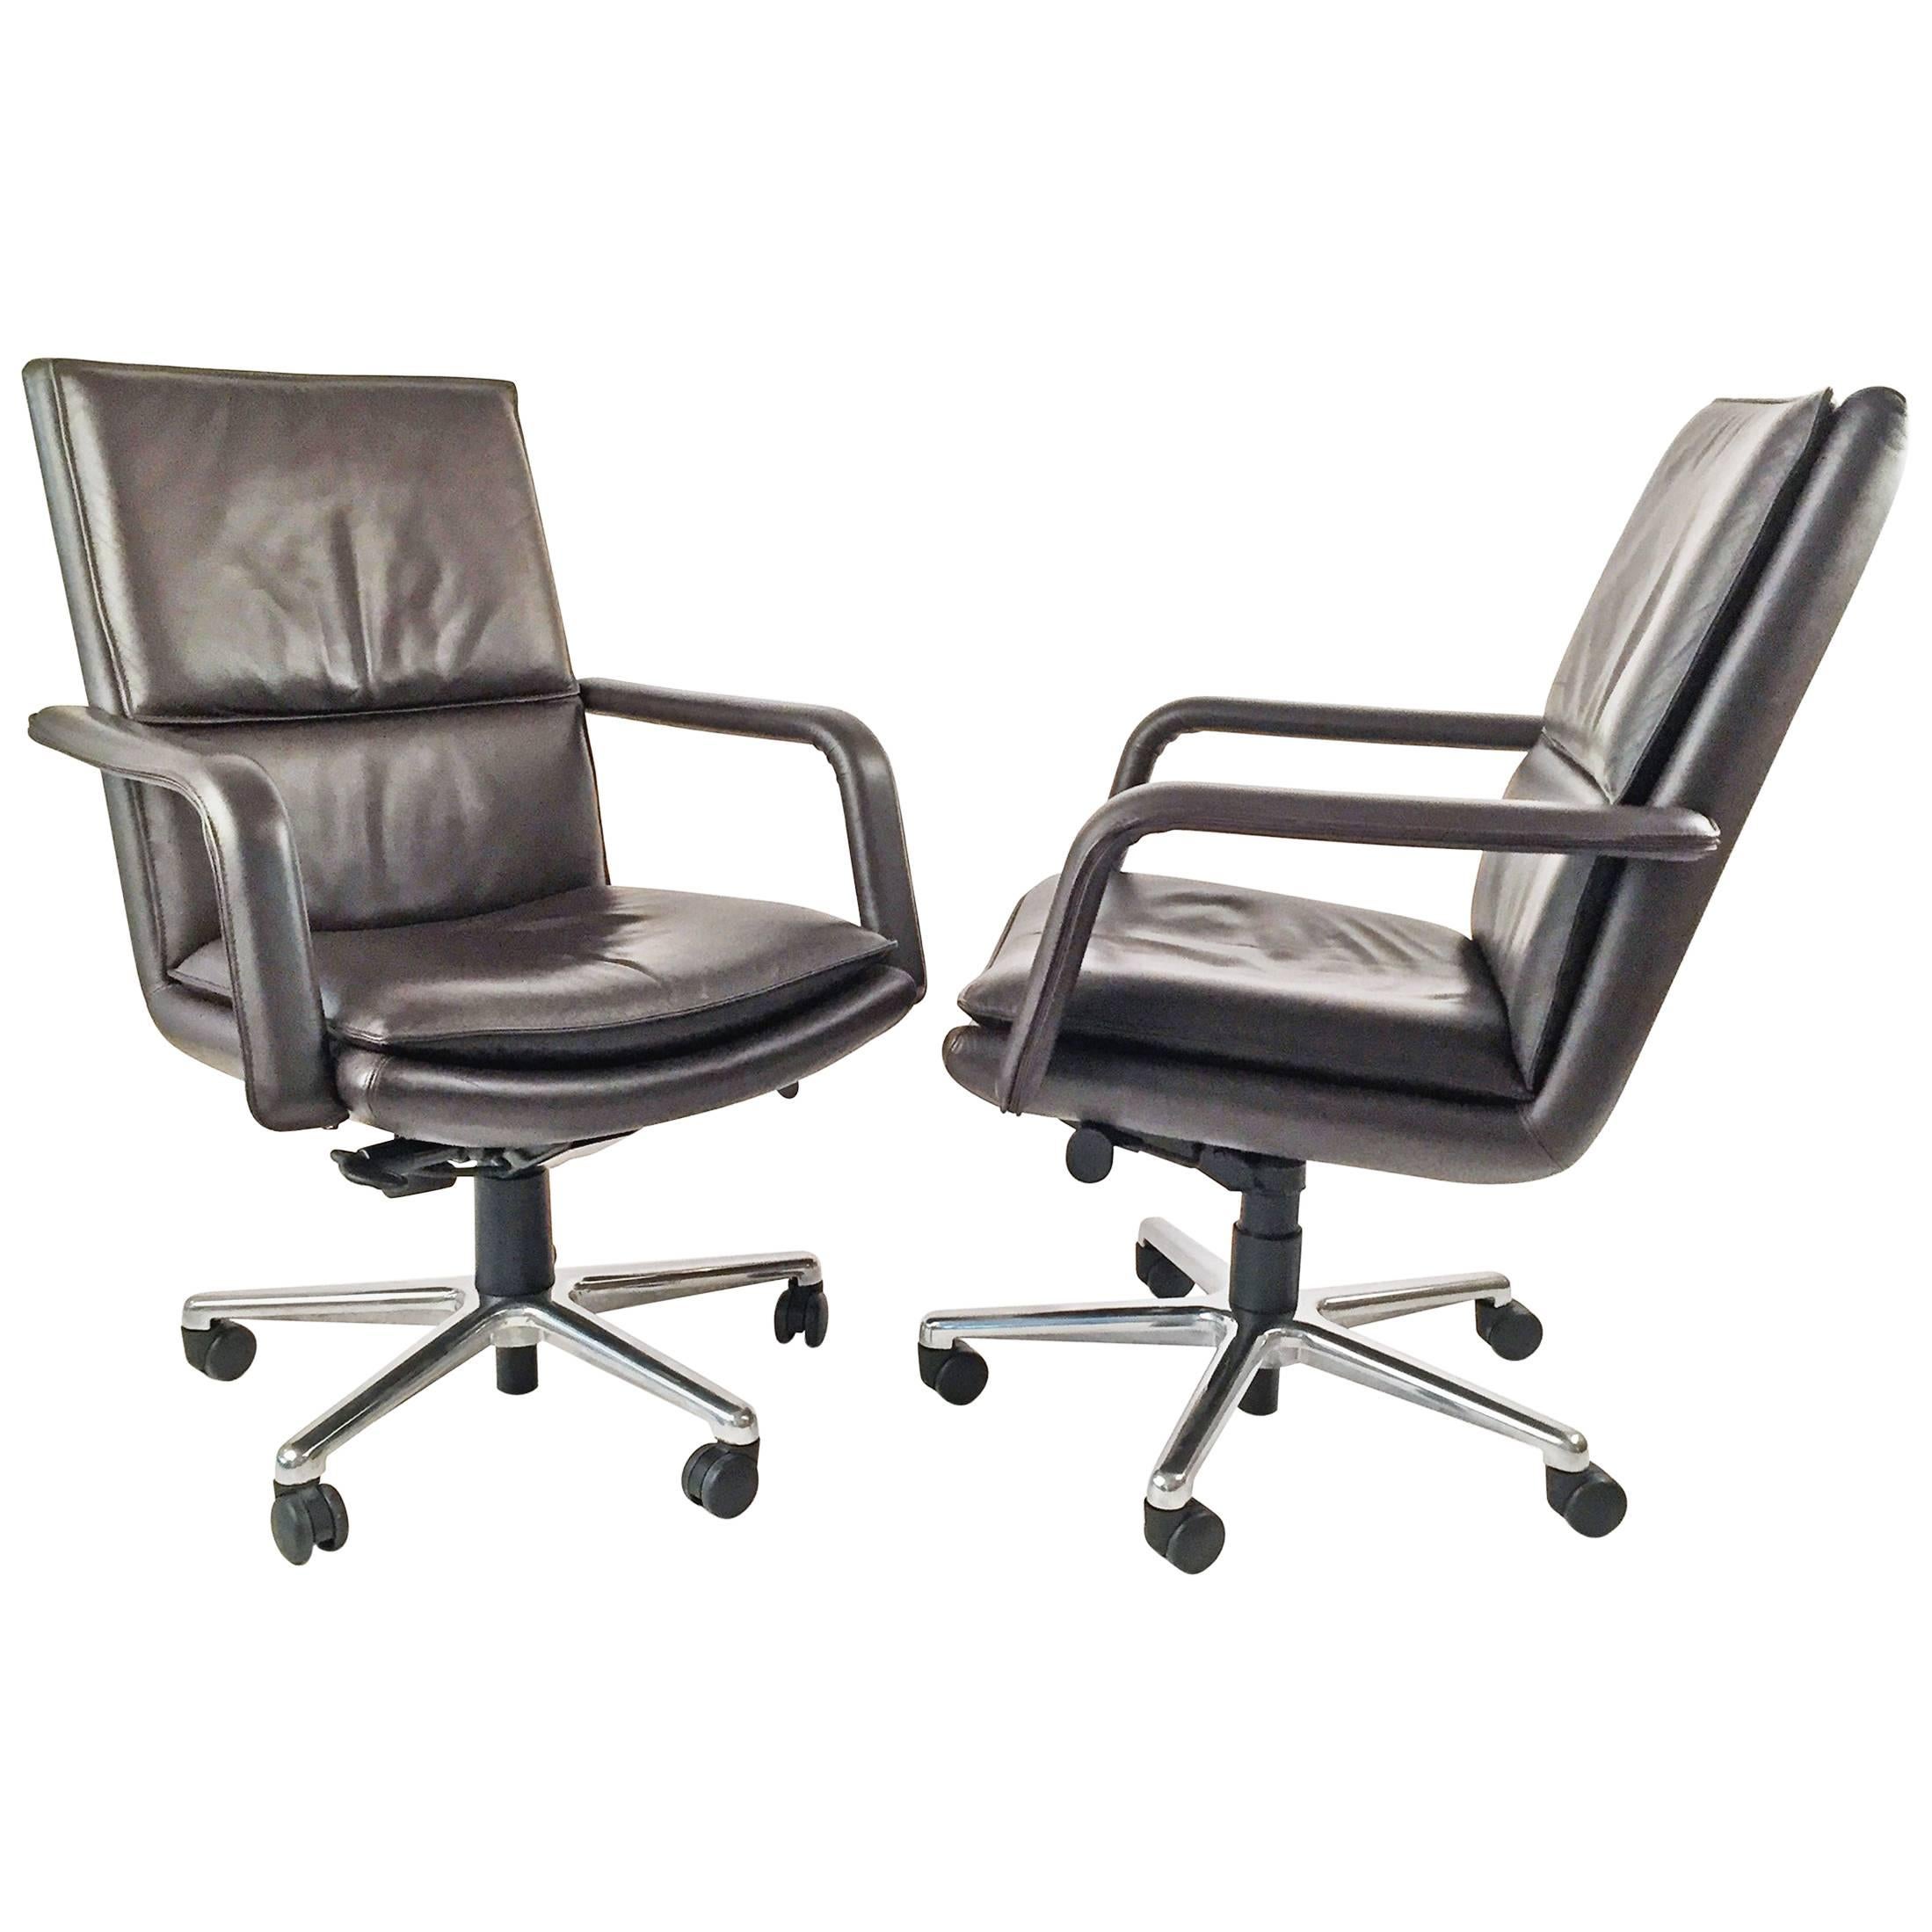 Executive Chairs Pair by Elite 597  Keilhauer 